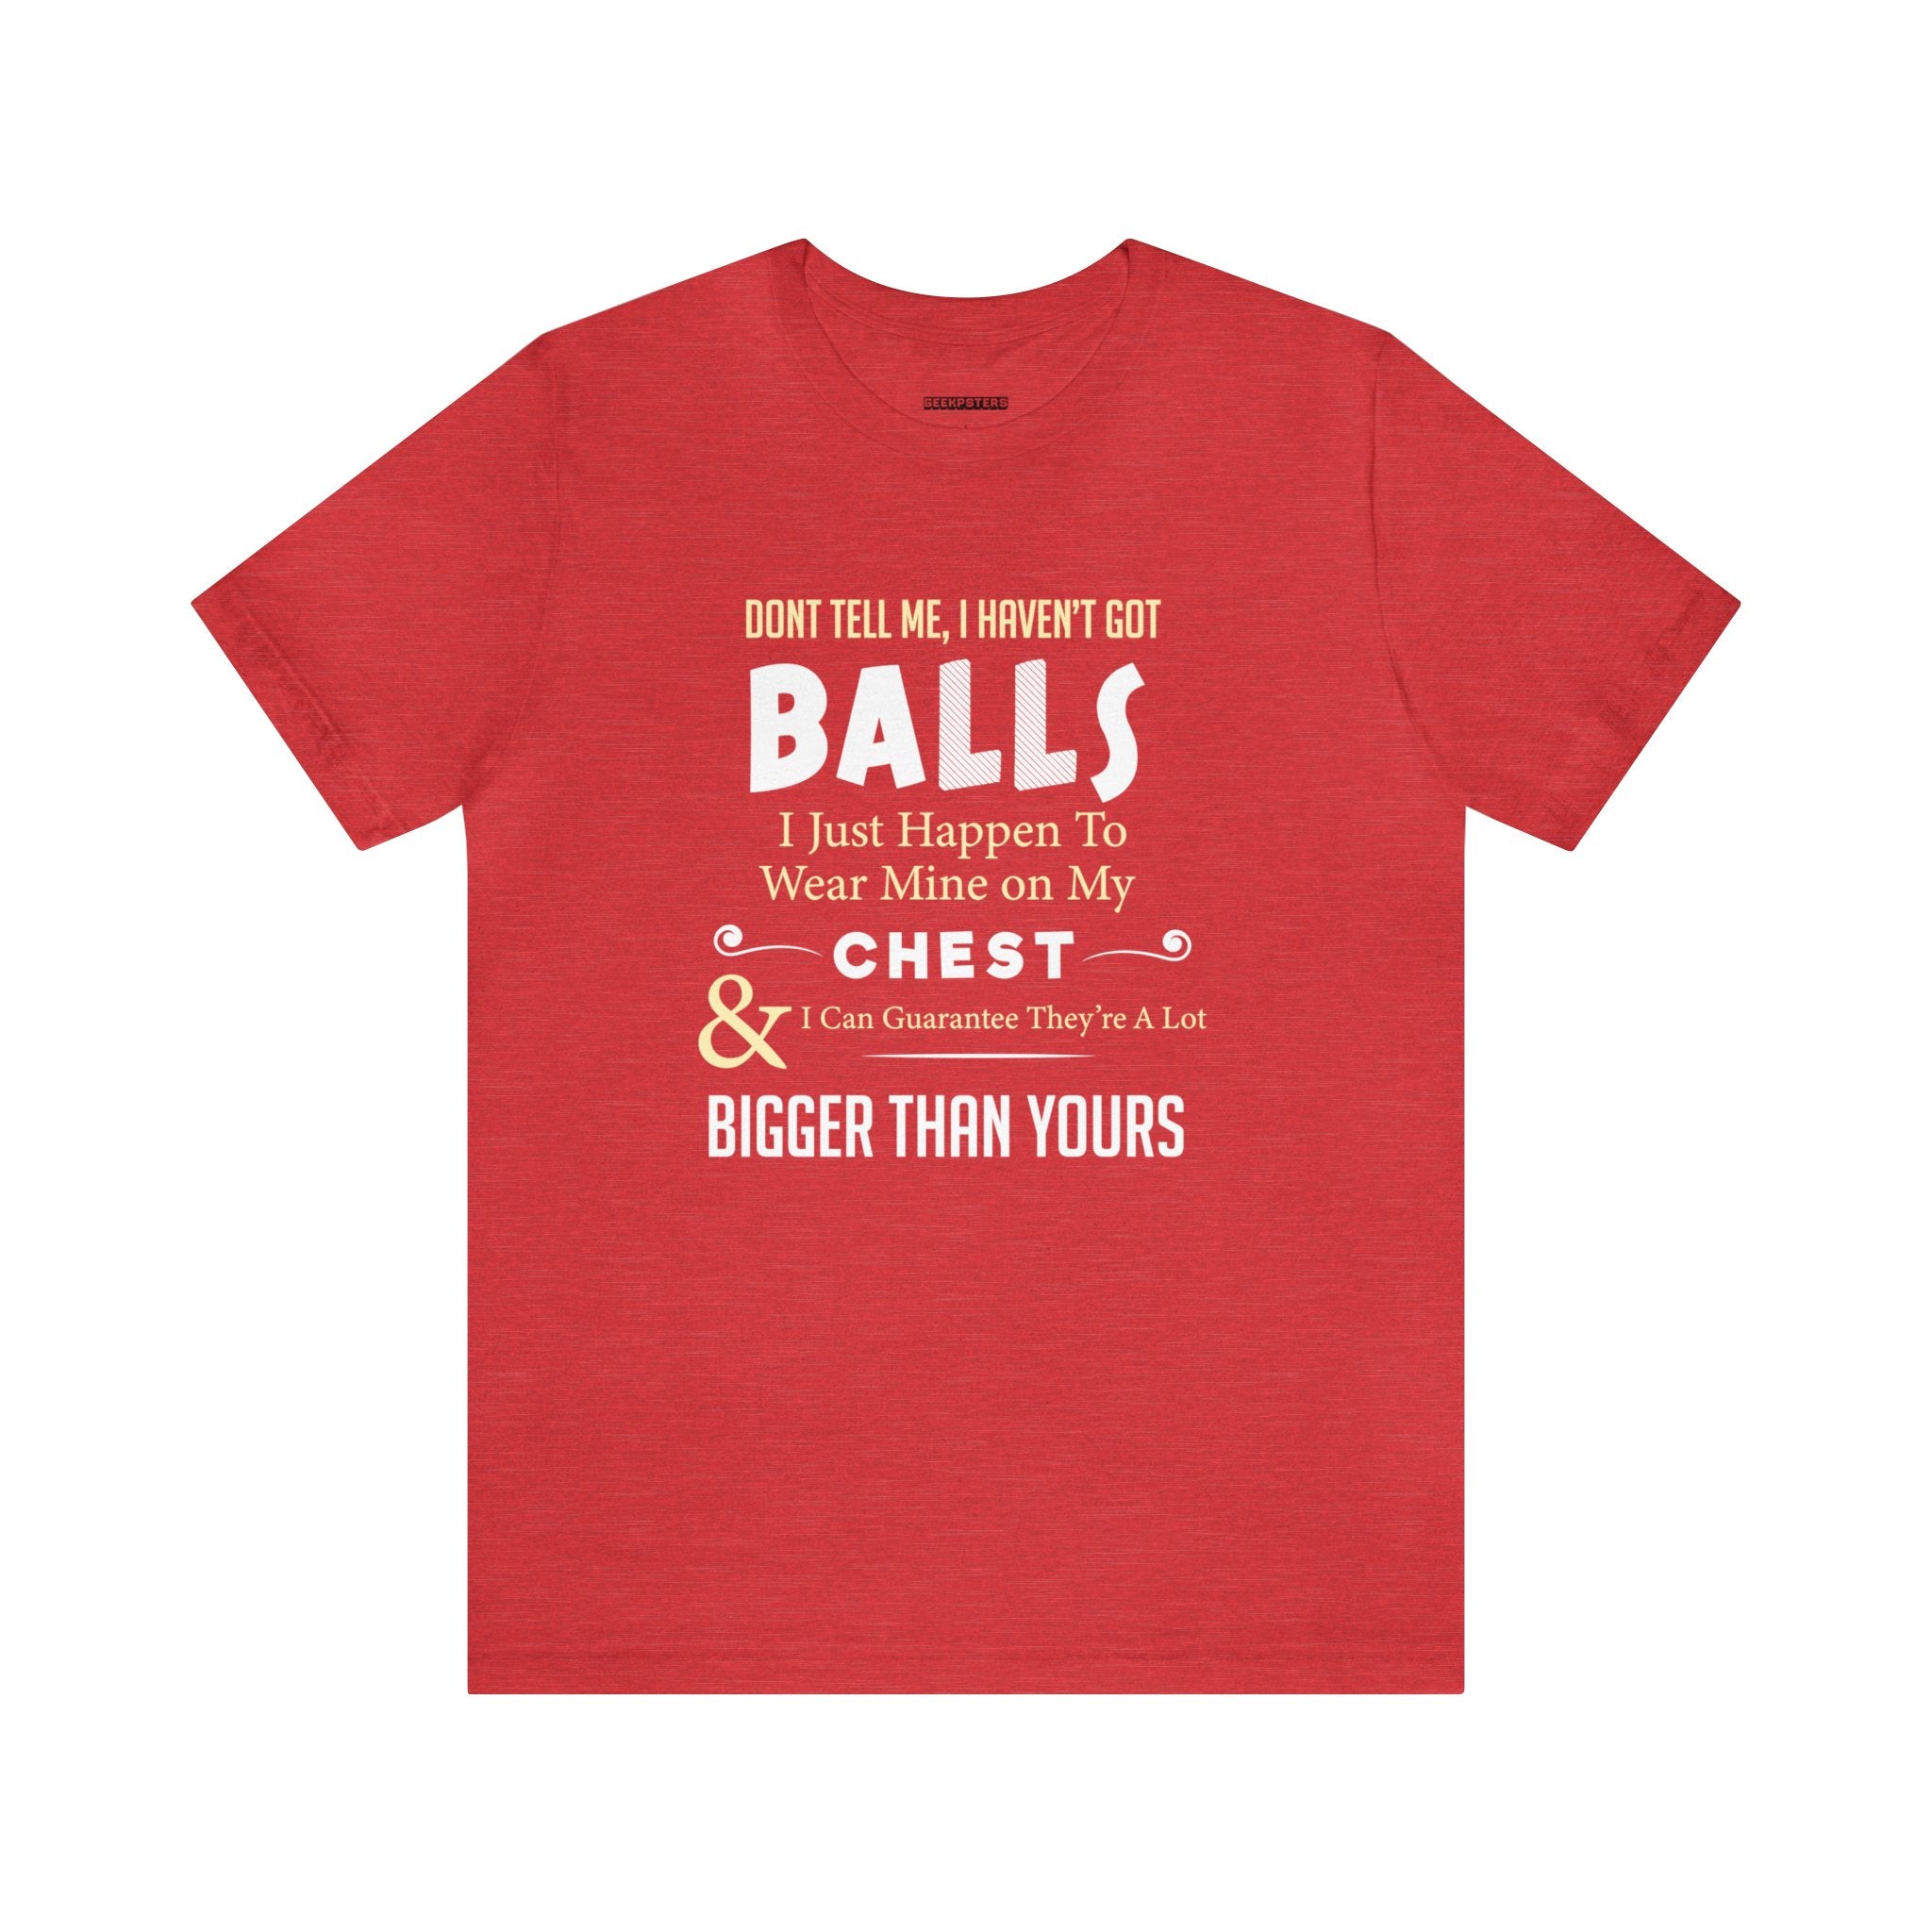 A bold fashion statement of a red Bigger Than Yours t-shirt that boldly proclaims "Bigger Than Yours" across the chest.